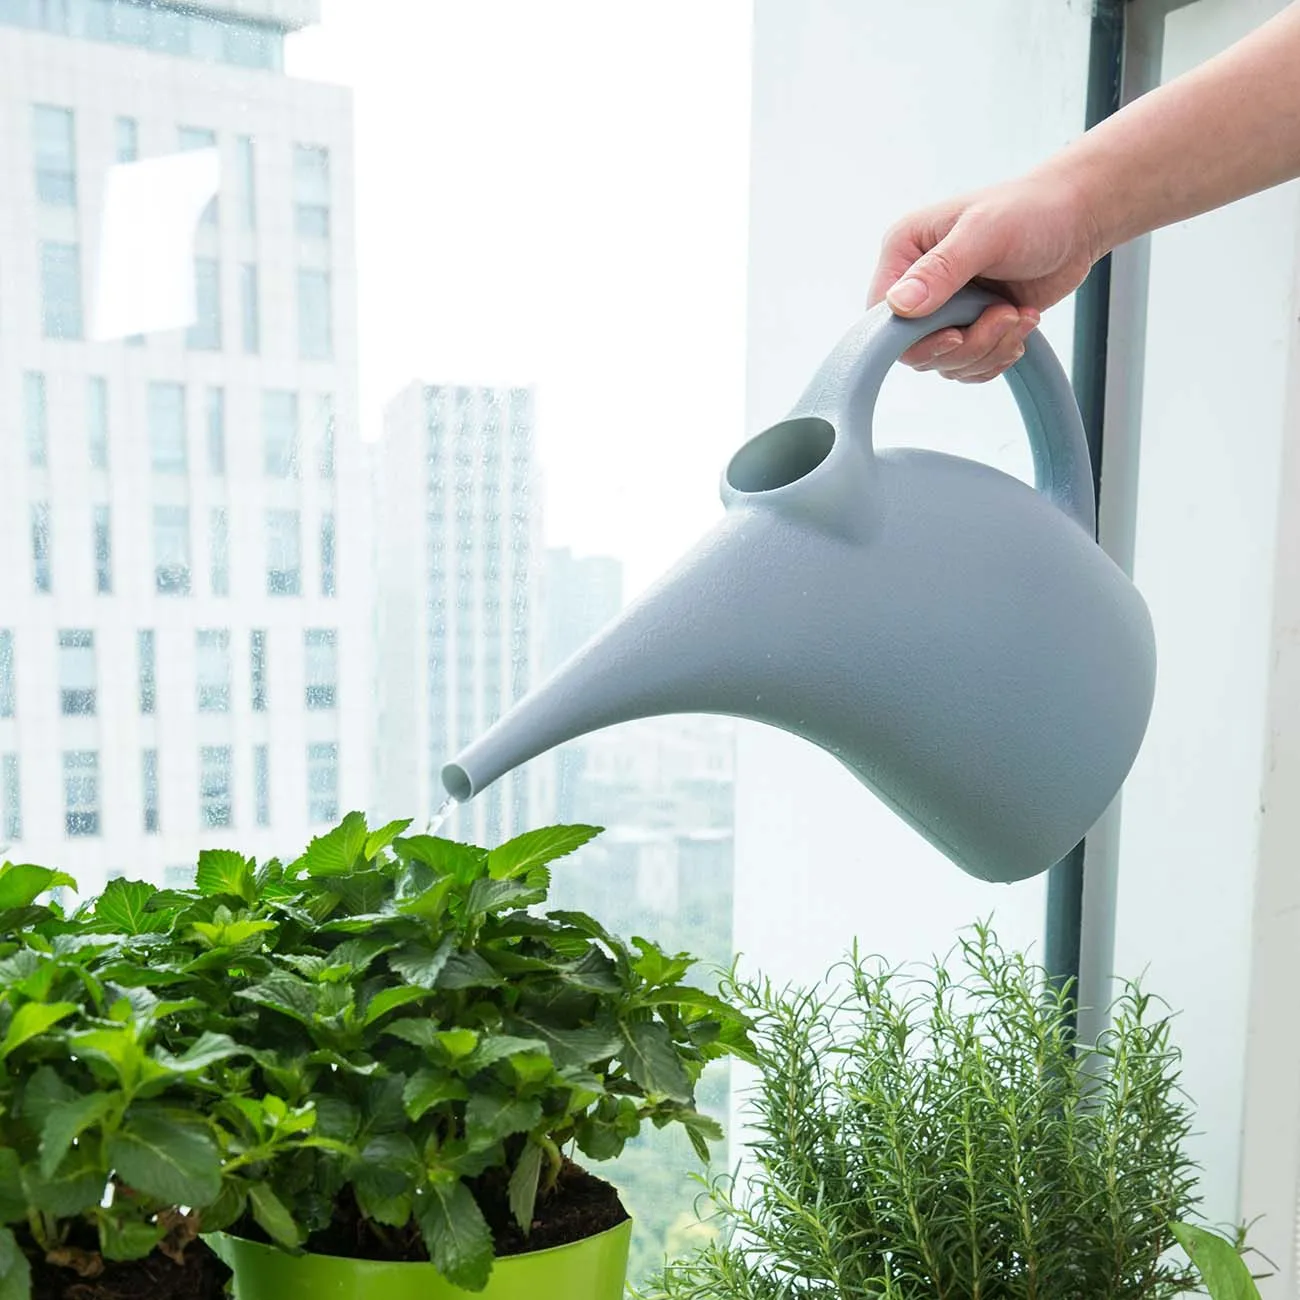 Plastic Watering Can Long Spout Elephant Houseplant Watering Pot jardim regadera Garden Accessories Indoor Irritation Tools automatic sprinkler system kit